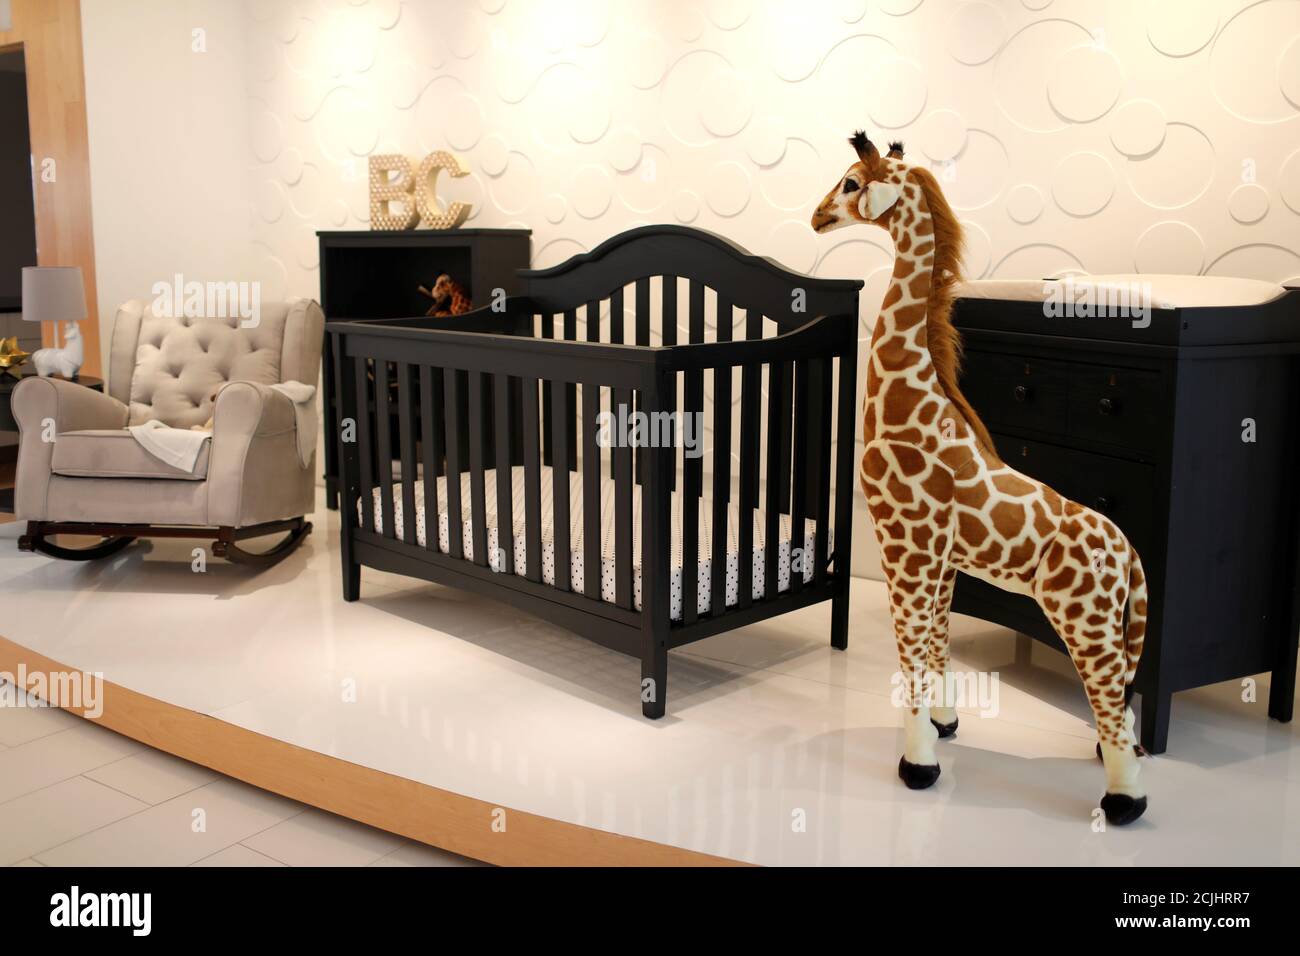 Childrens Furniture High Resolution Stock Photography And Images Alamy